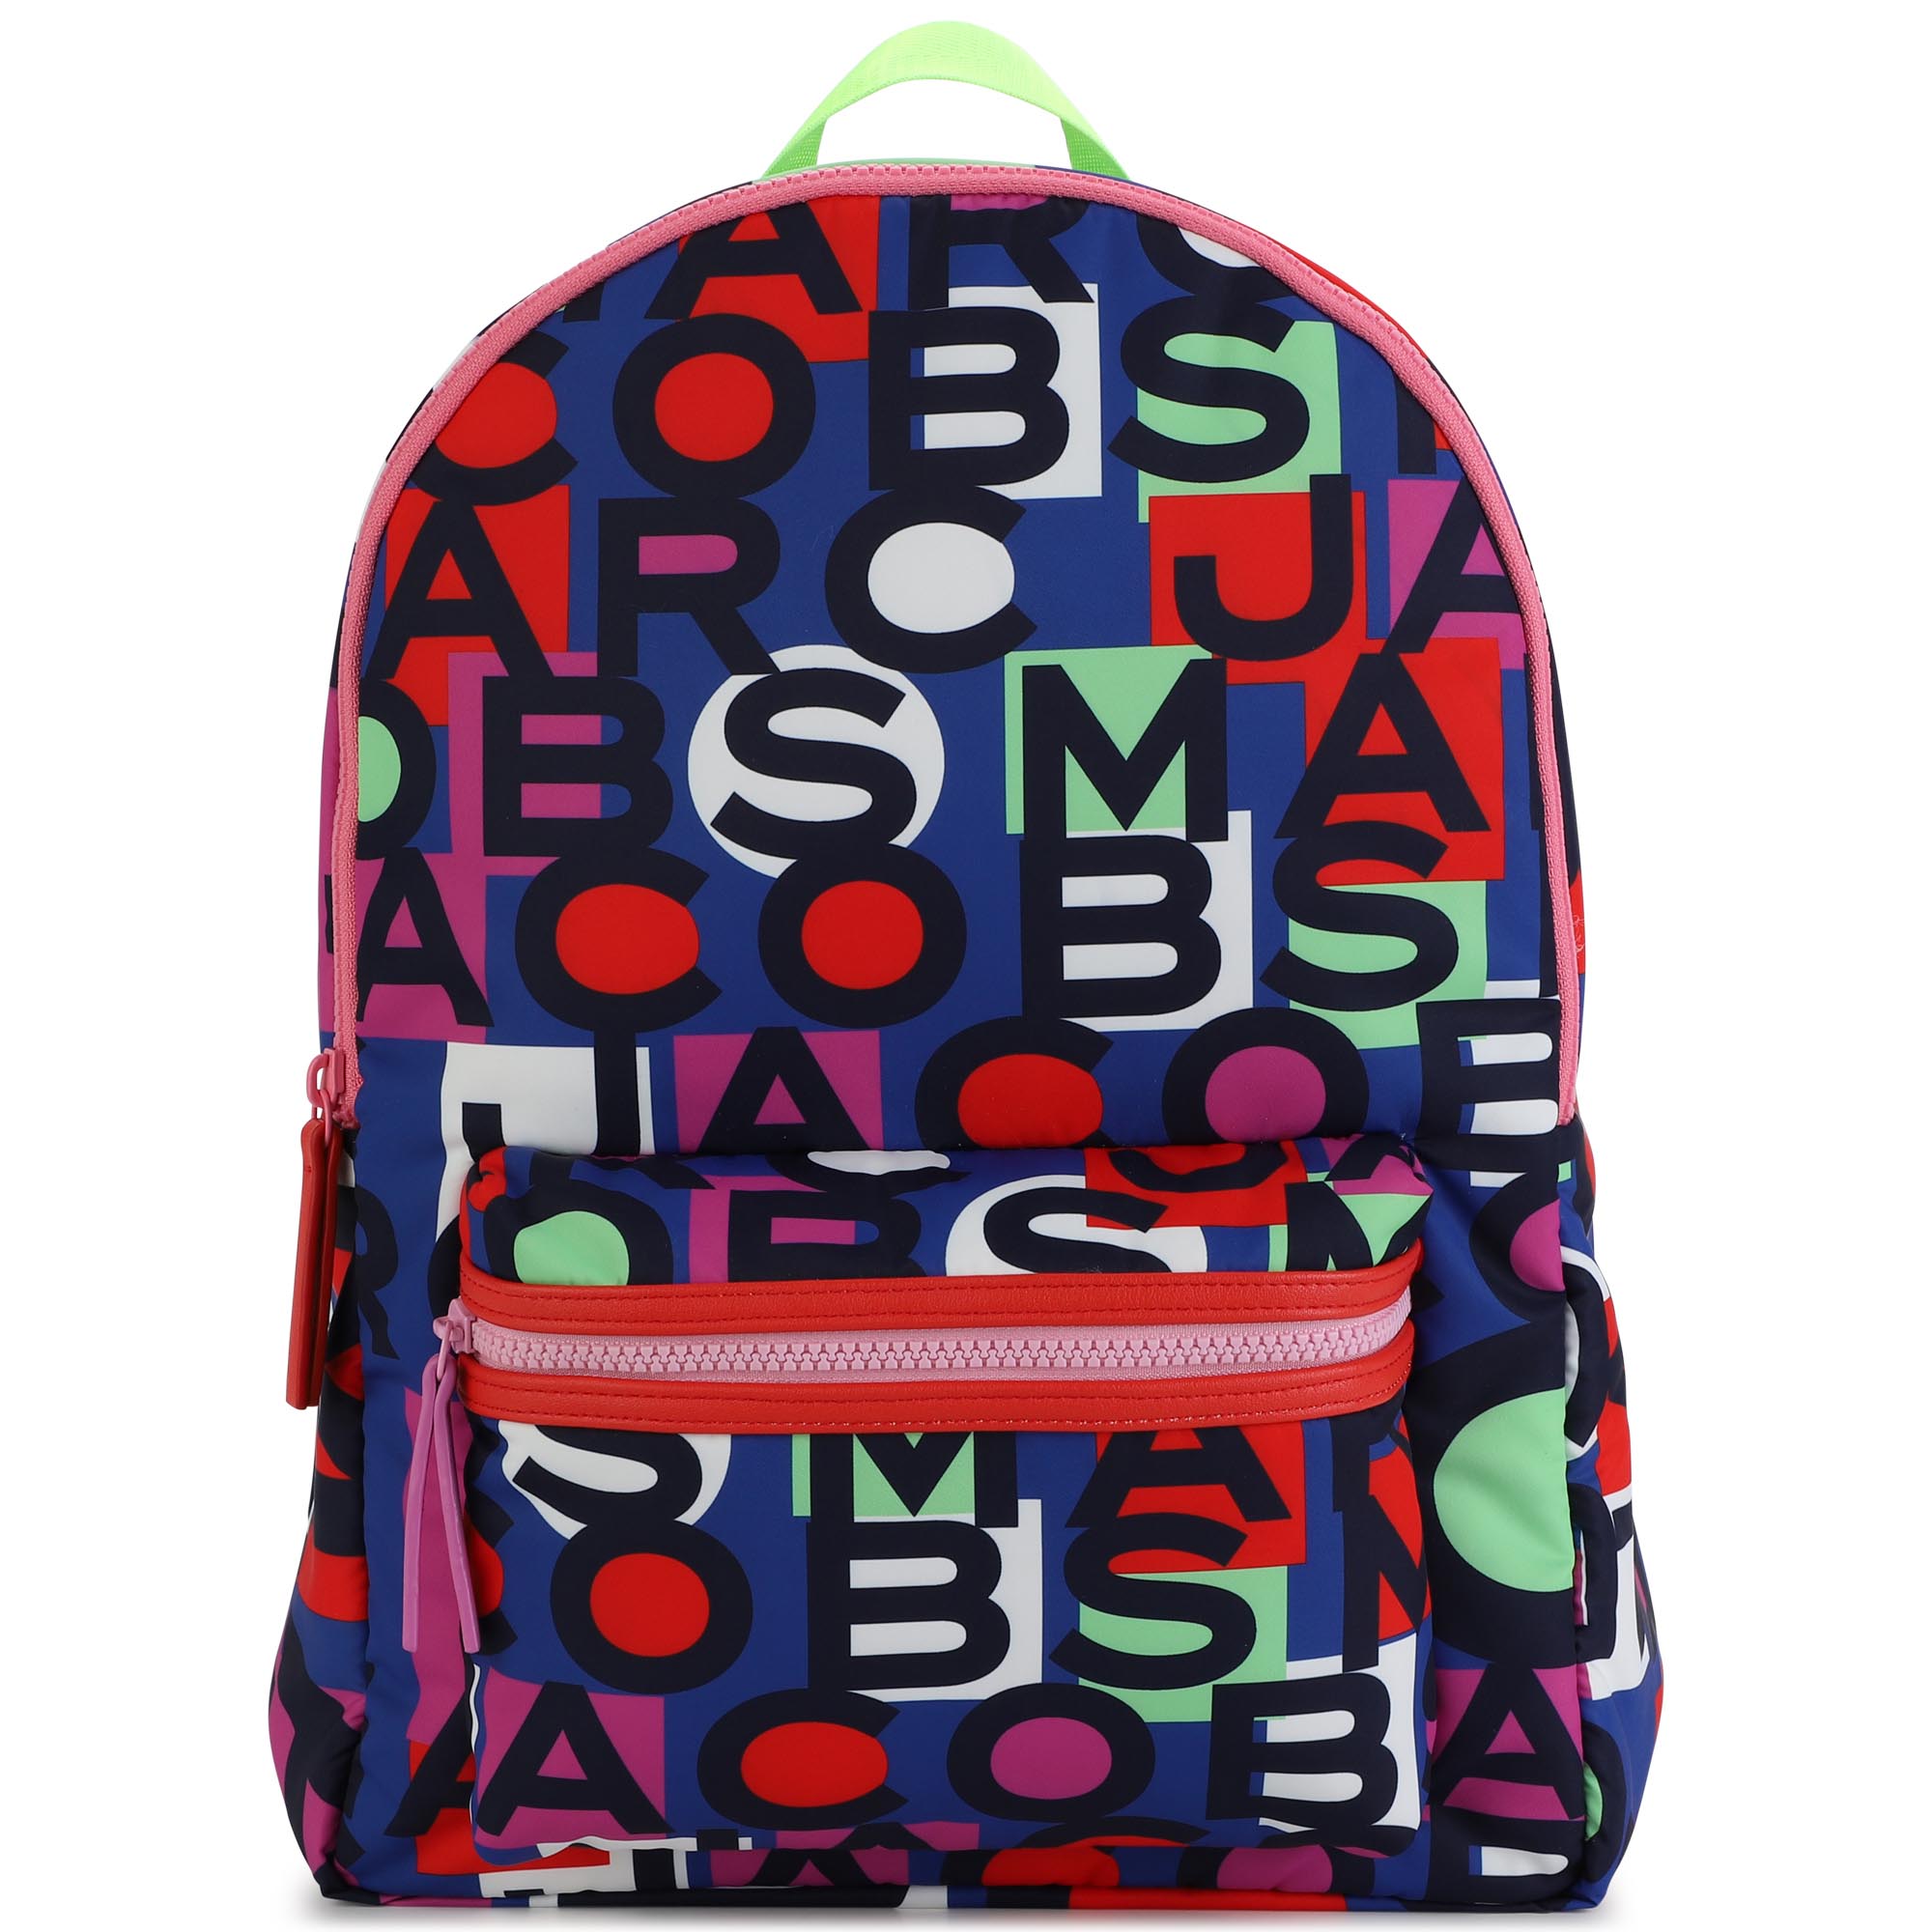 "THE BACKPACK" MARC JACOBS for BOY